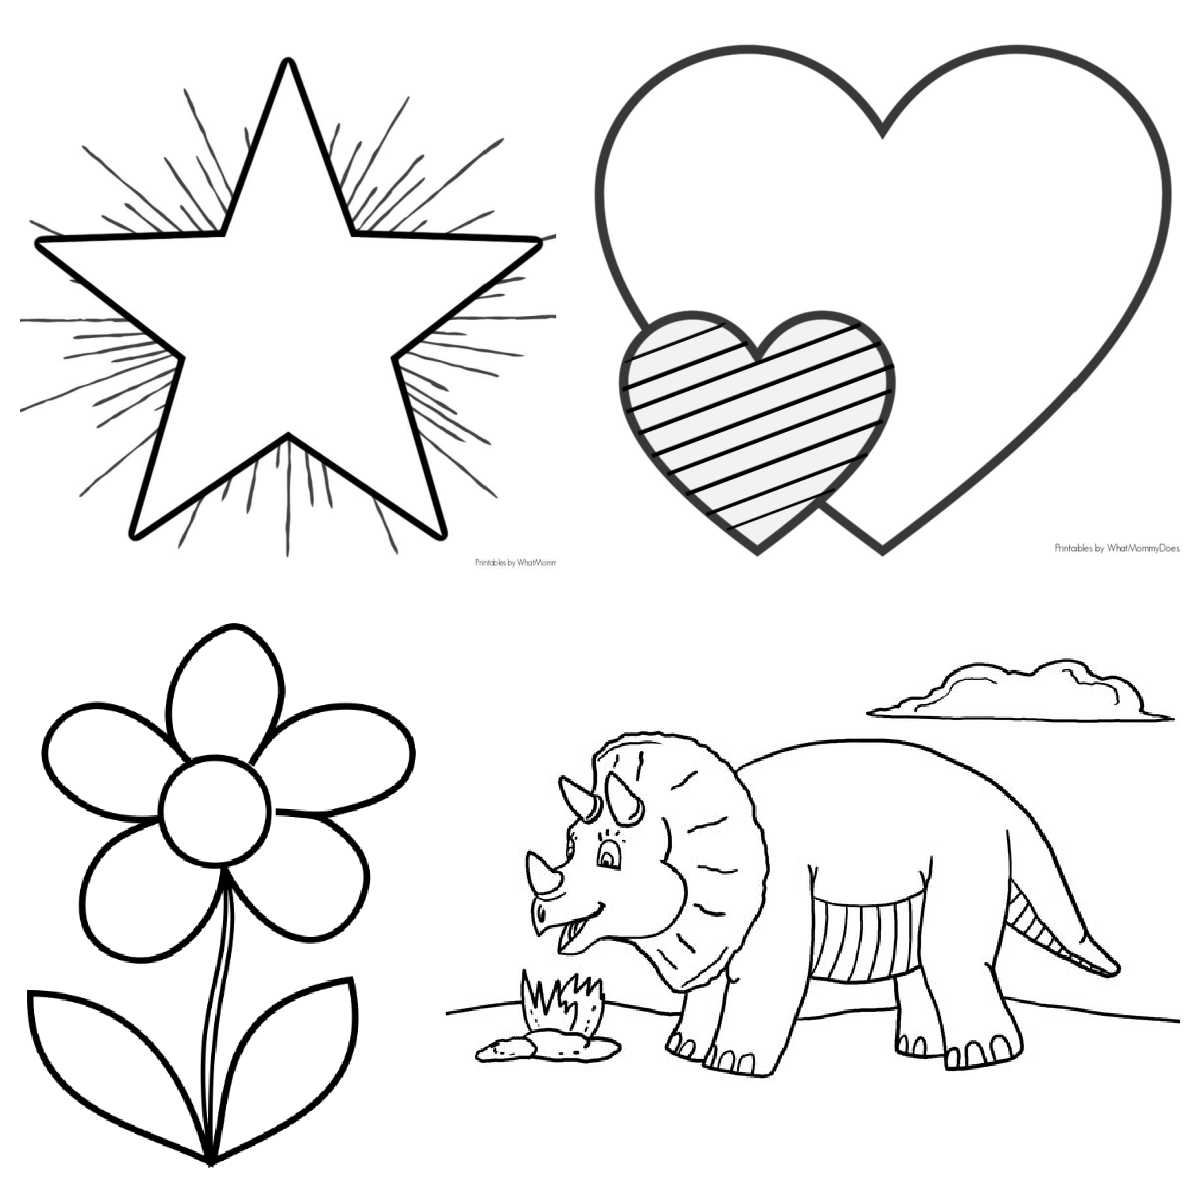 Easy coloring pages for kids cute designs